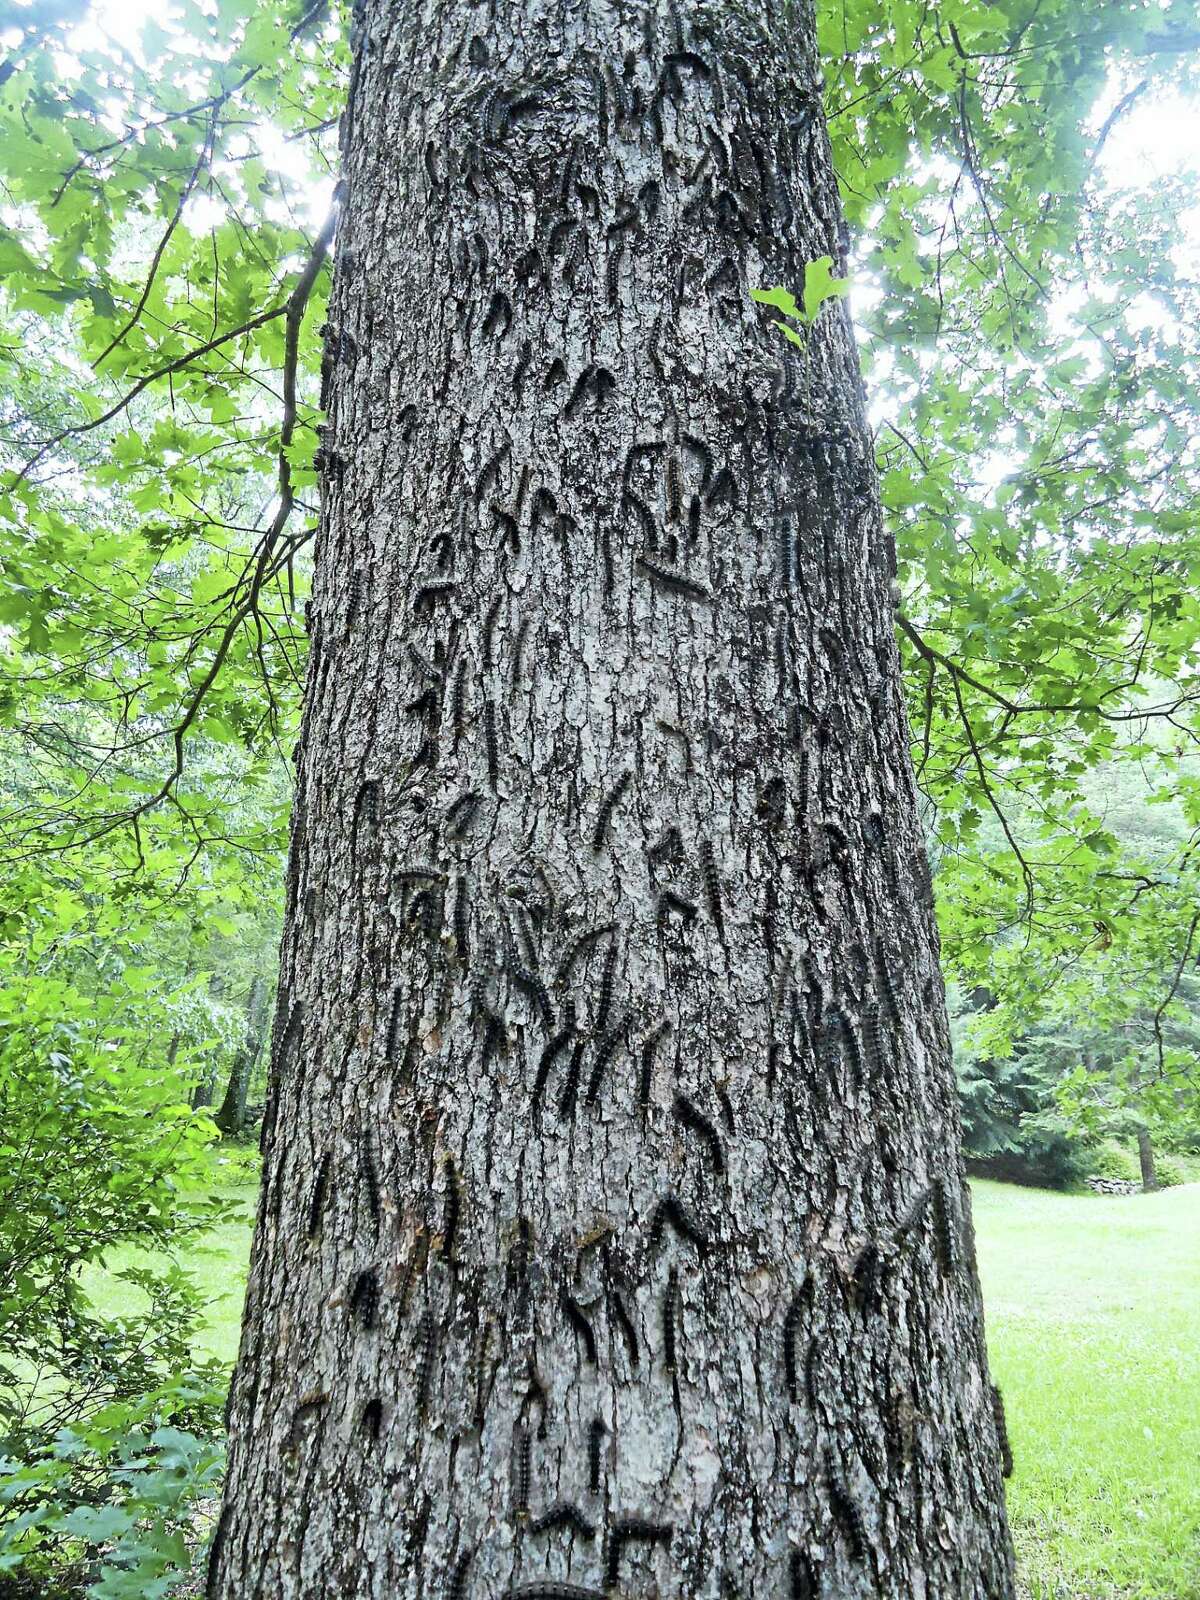 Gypsy moth caterpillars spend their early lives in trees. They particularly like oak trees. (Submitted Photo - CAES)